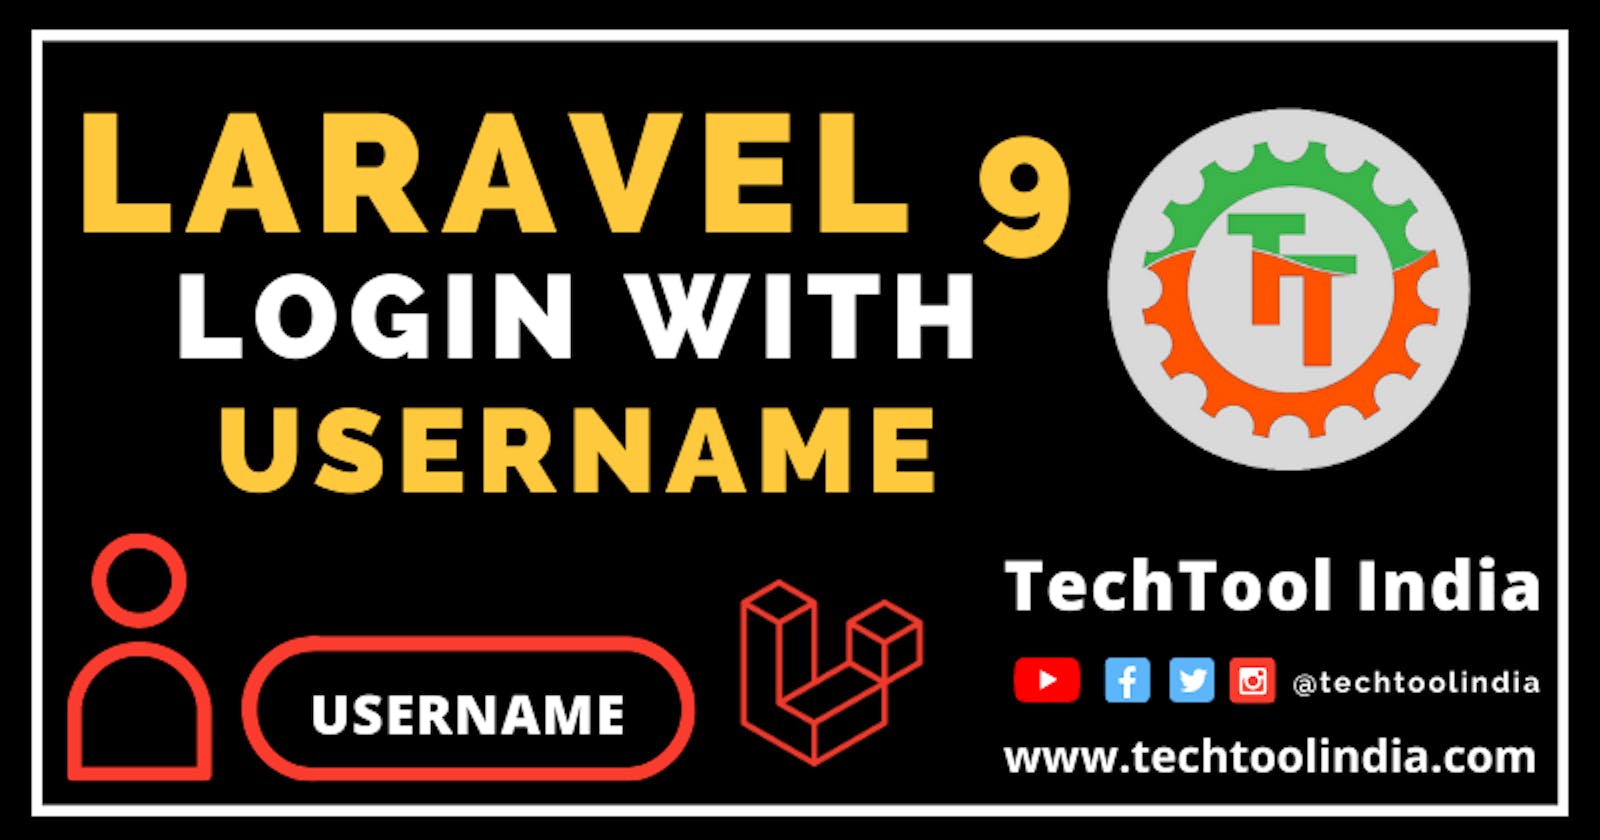 How to Login with USERNAME instead of Email in Laravel 9?